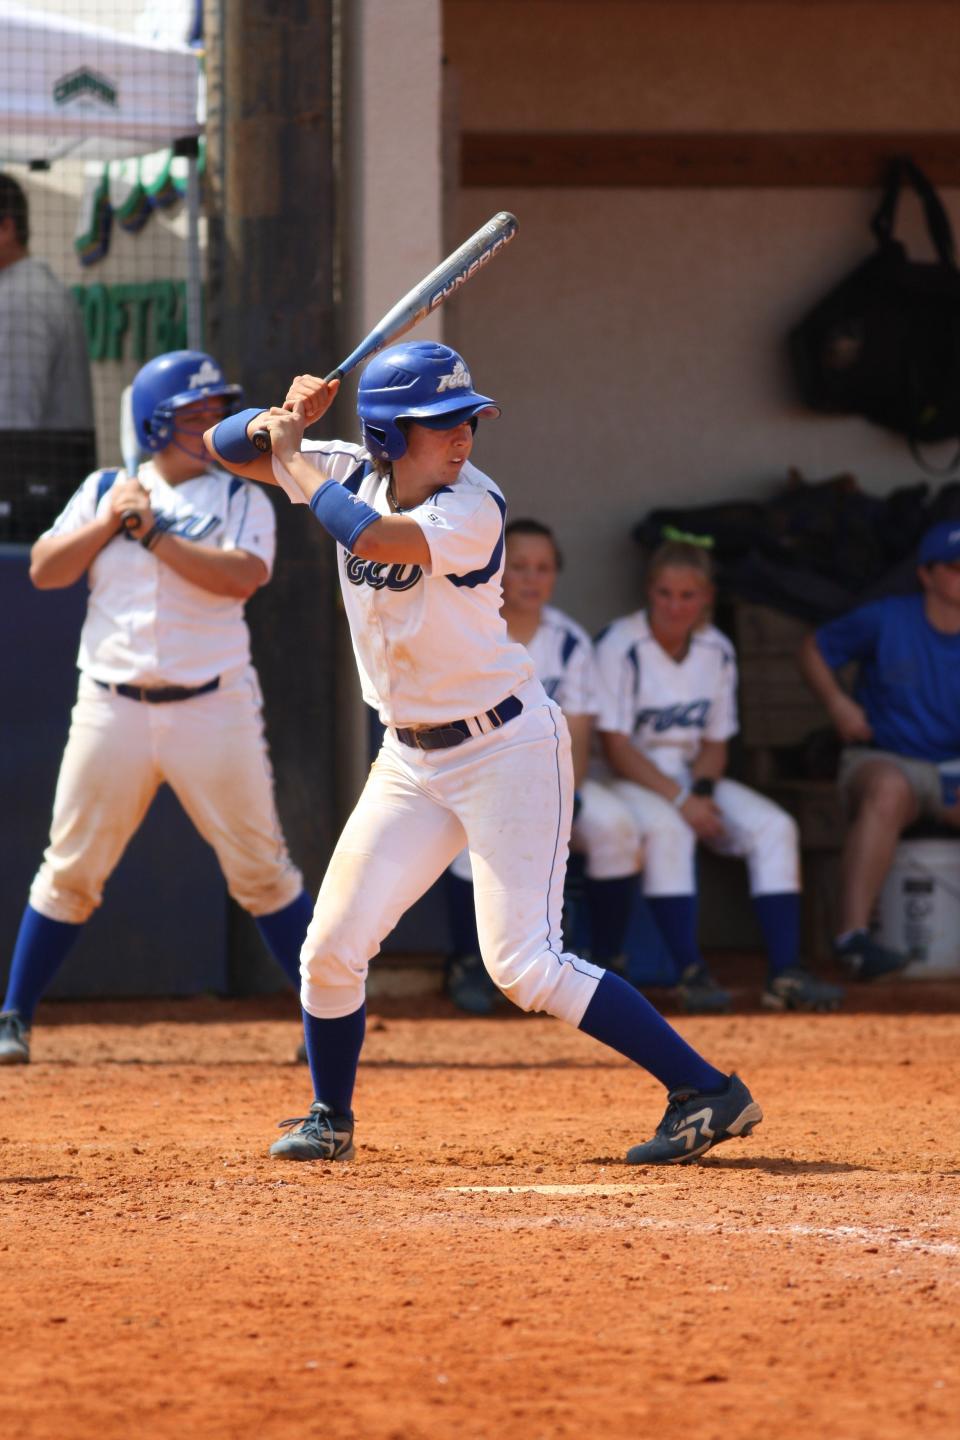 Cheyenne Jenks played softball and volleyball for FGCU from 2005-09. She was the ASUN Softball Player of the Year as a senior in 2009. In 2020, Jenks, a Naples High School graduate, was inducted into the ASUN Hall of Fame.